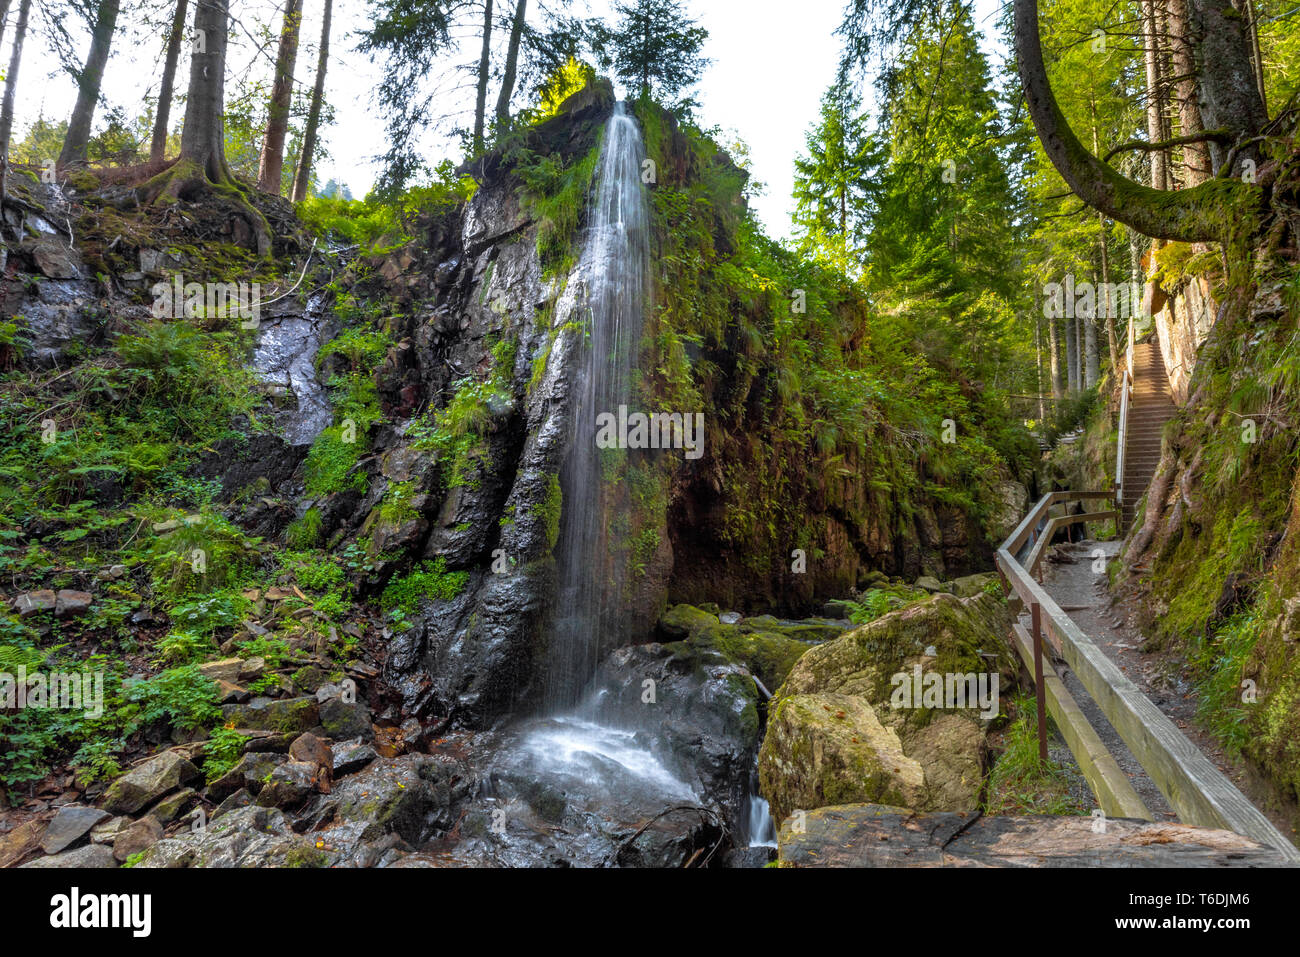 the waterfalls of Menzenschwand, High Black Forest, Germany, cascade in a ravine falling over rock edge Stock Photo